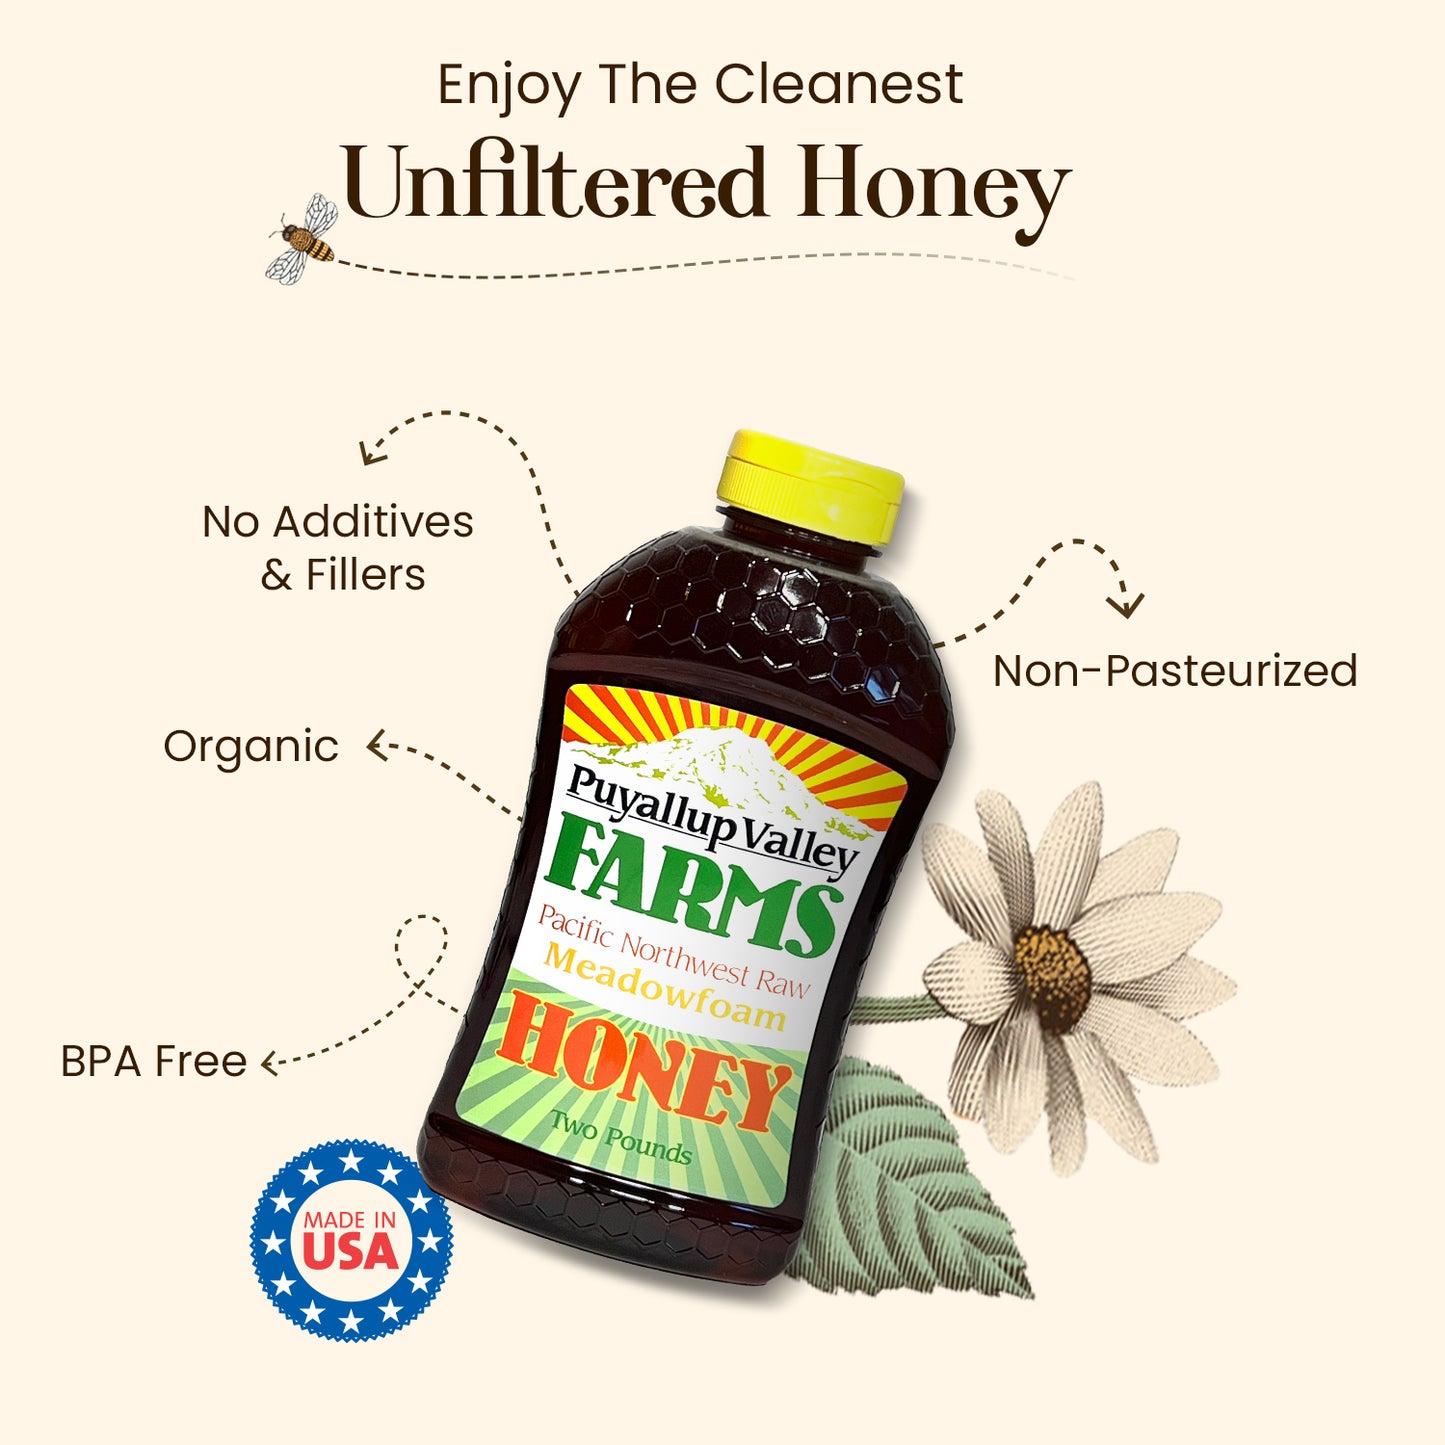 Blueberry Raw Honey by Puyallup Valley Farms Organic Unfiltered Raw Honey All Natural Sweetener No Additives Non Pasteurized Organic Raw Honey BPA Free Raw Organic Honey Bear Squeeze Bottle No Drip Cap FREE SHIPPING Blueberries 12 Oz.